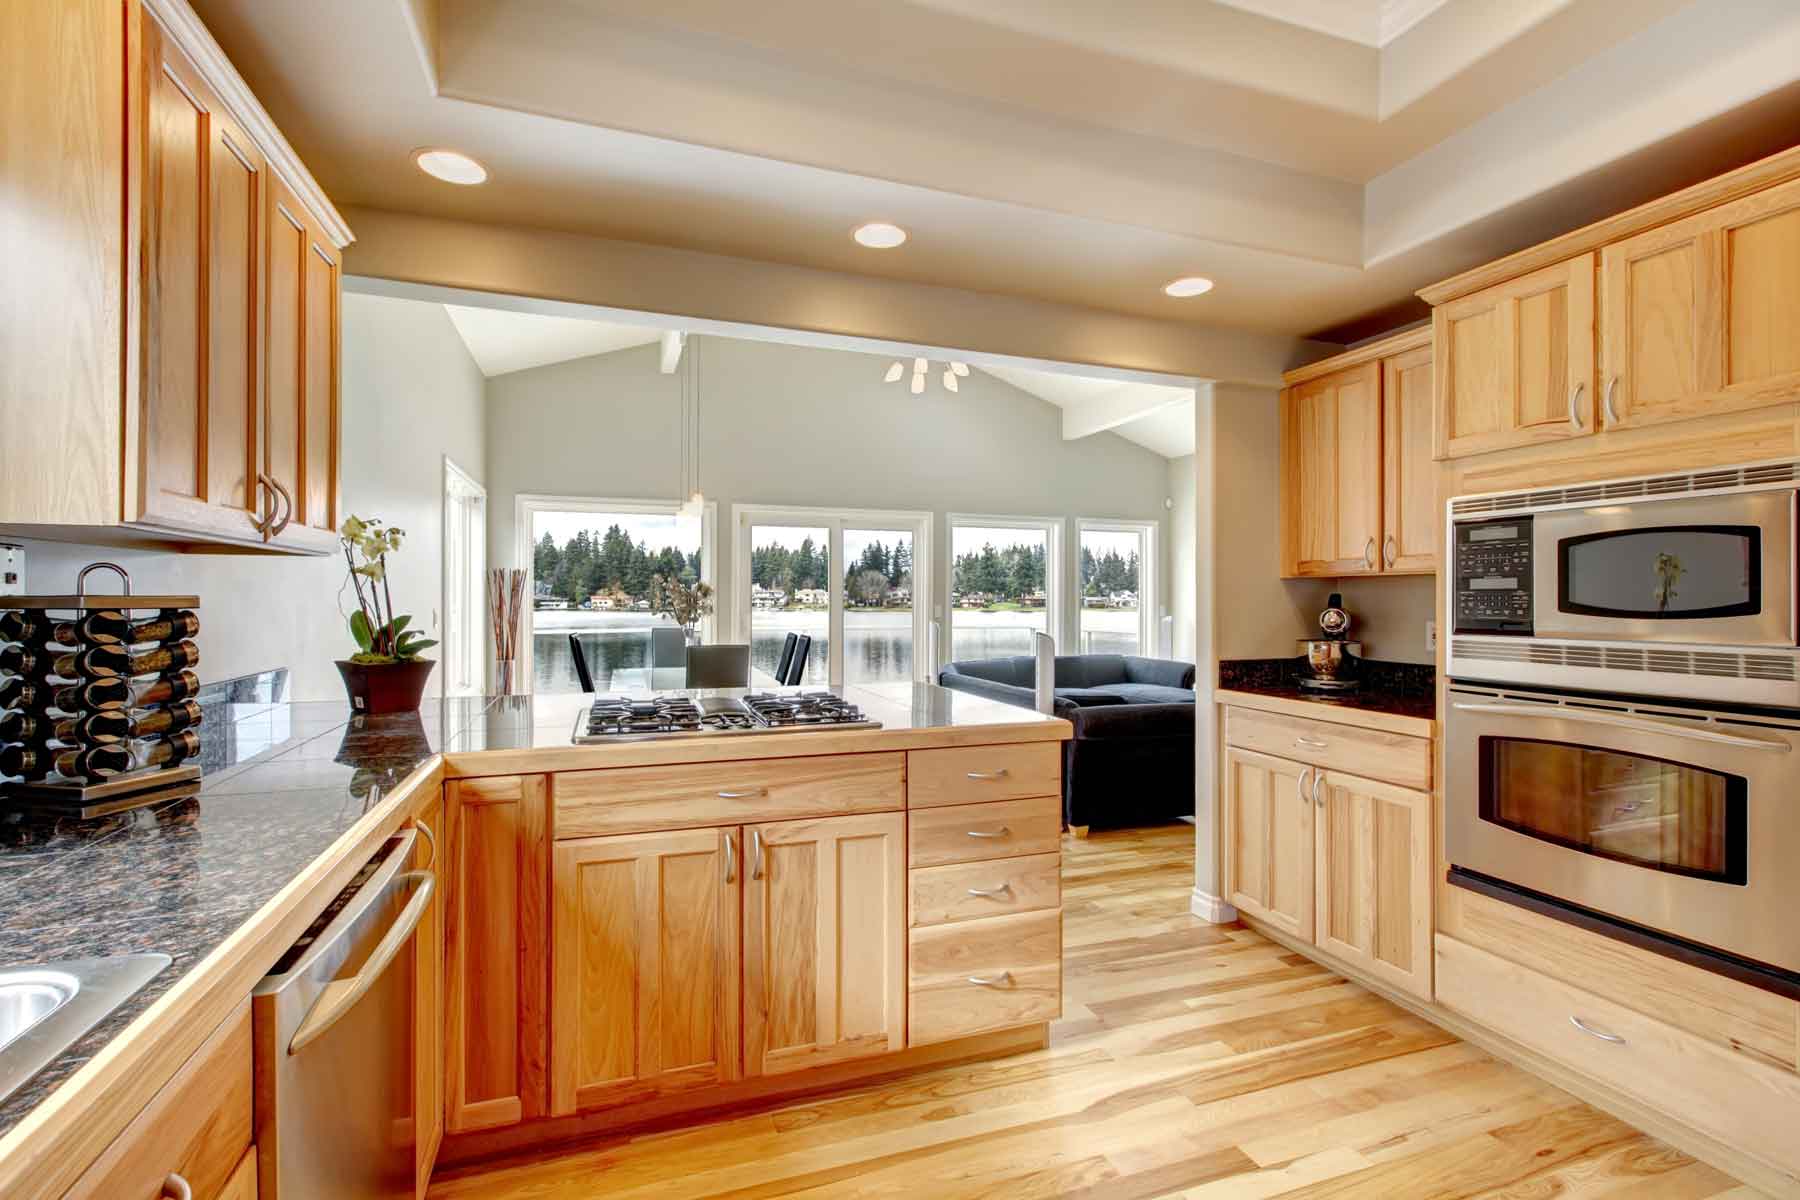 Average Cost To Refinish Kitchen Cabinets